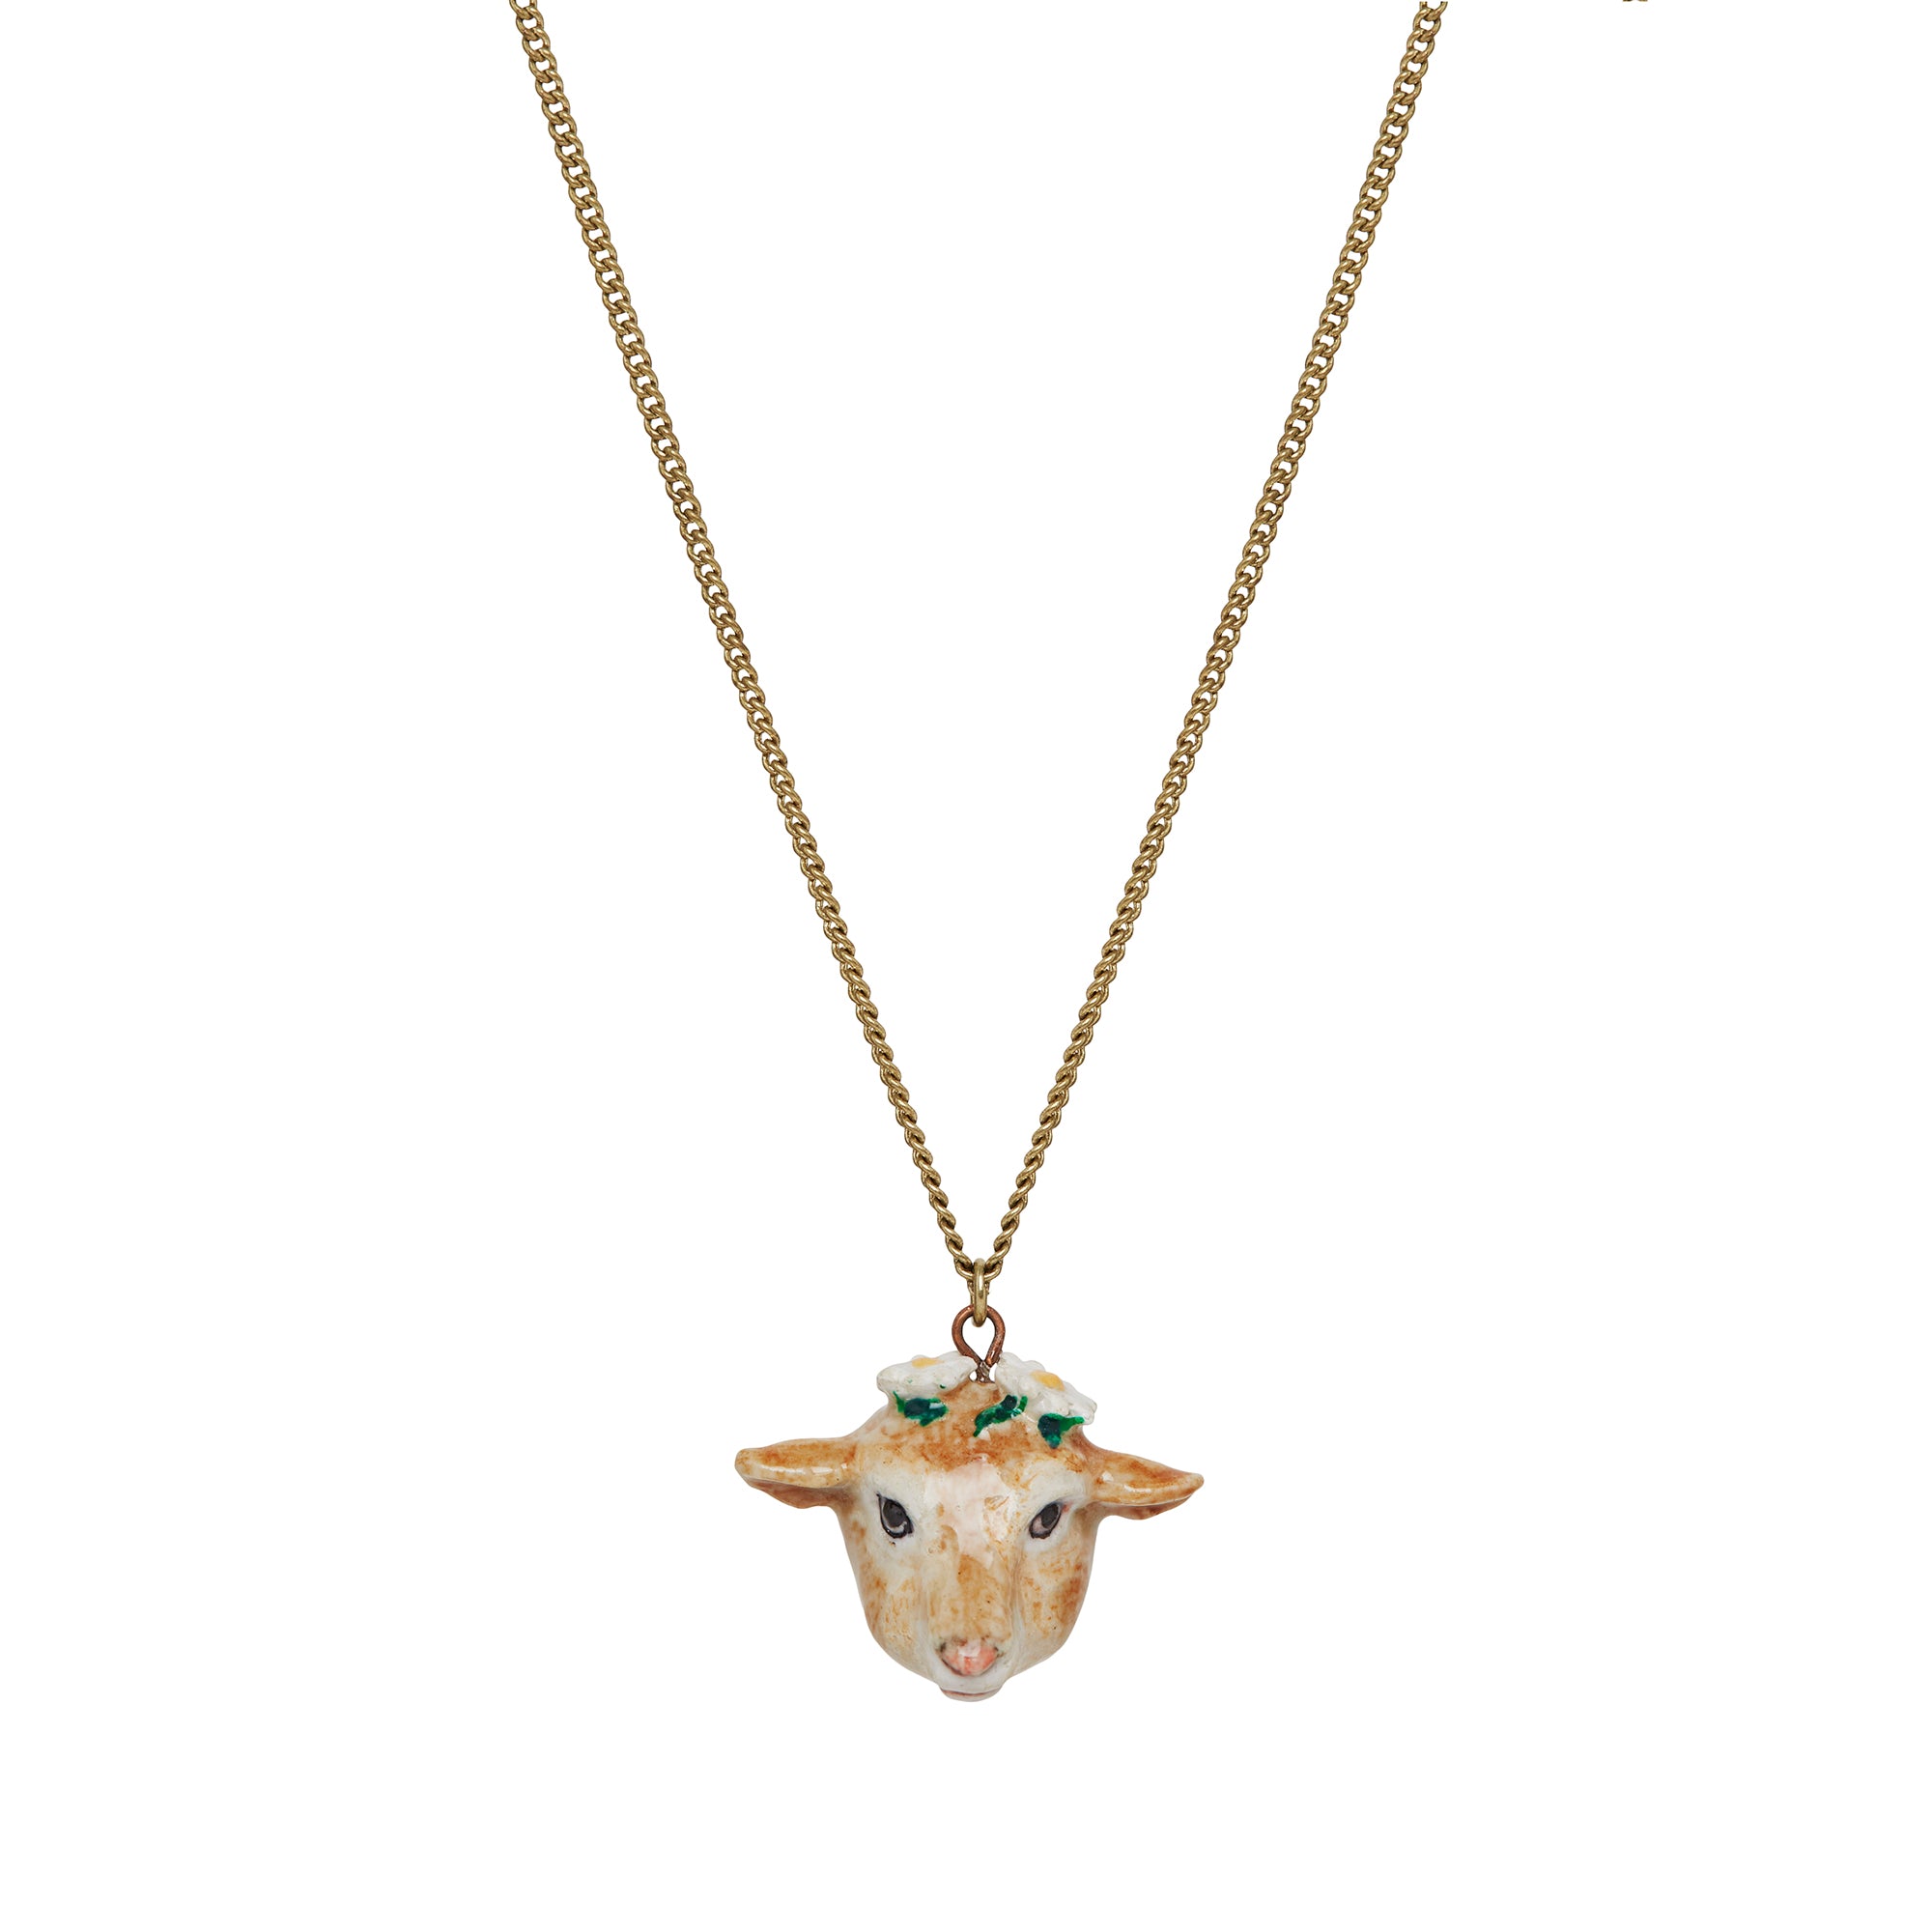 Goat Head Necklace